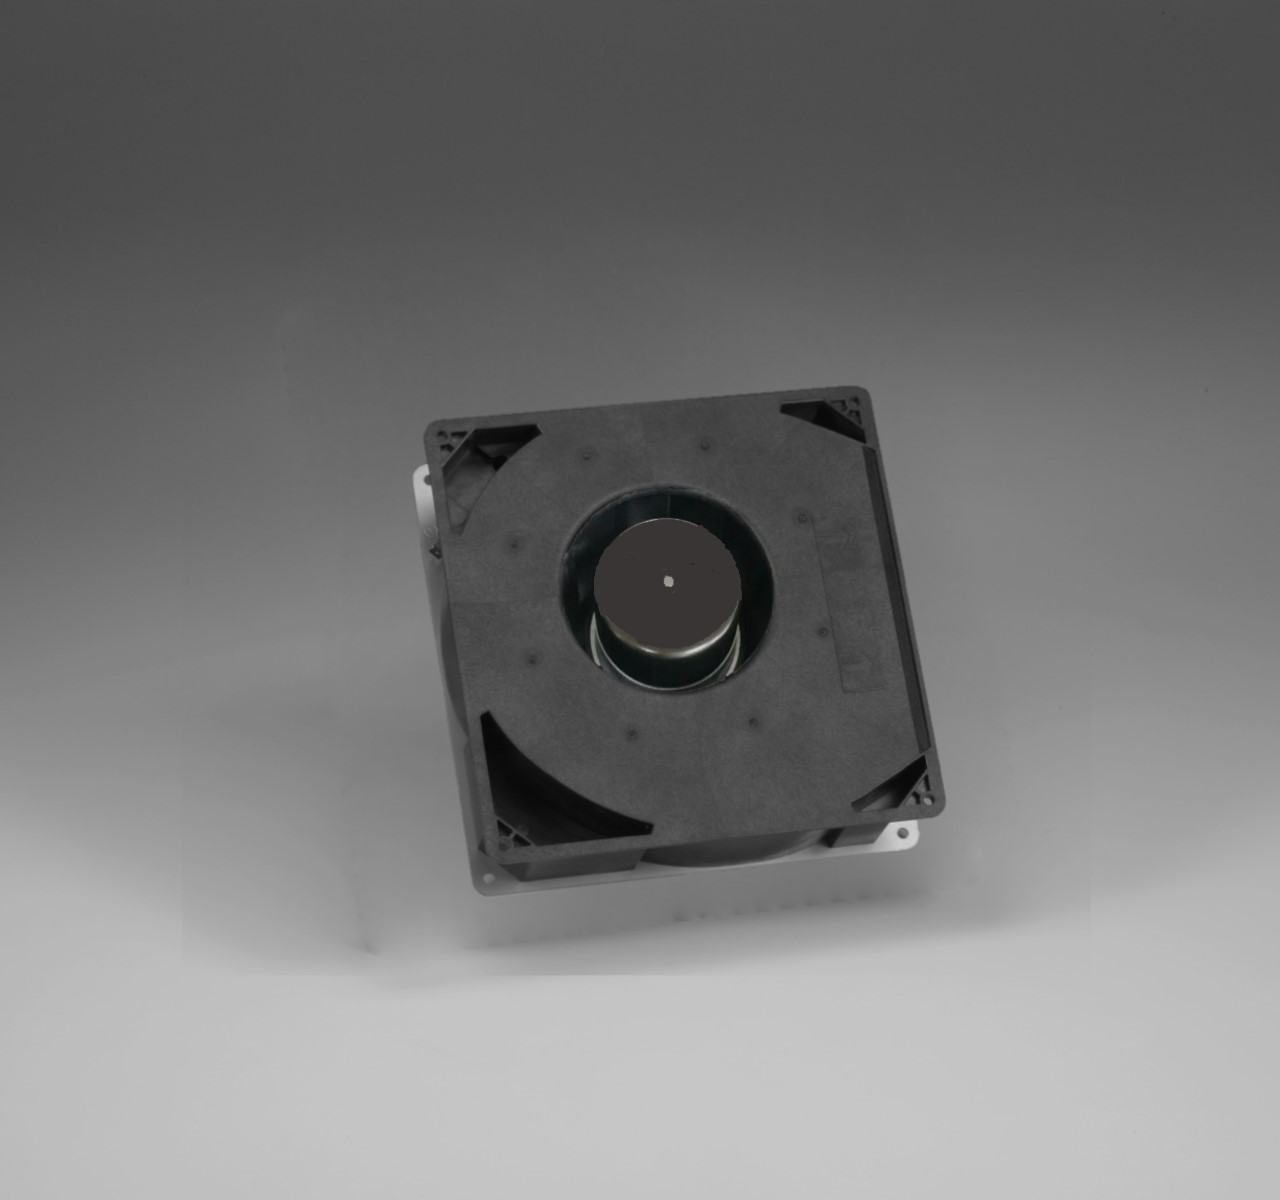 Fulltech launched the first DC blower fan UF-D160DPB with high static pressure, energy saving and other characteristics.